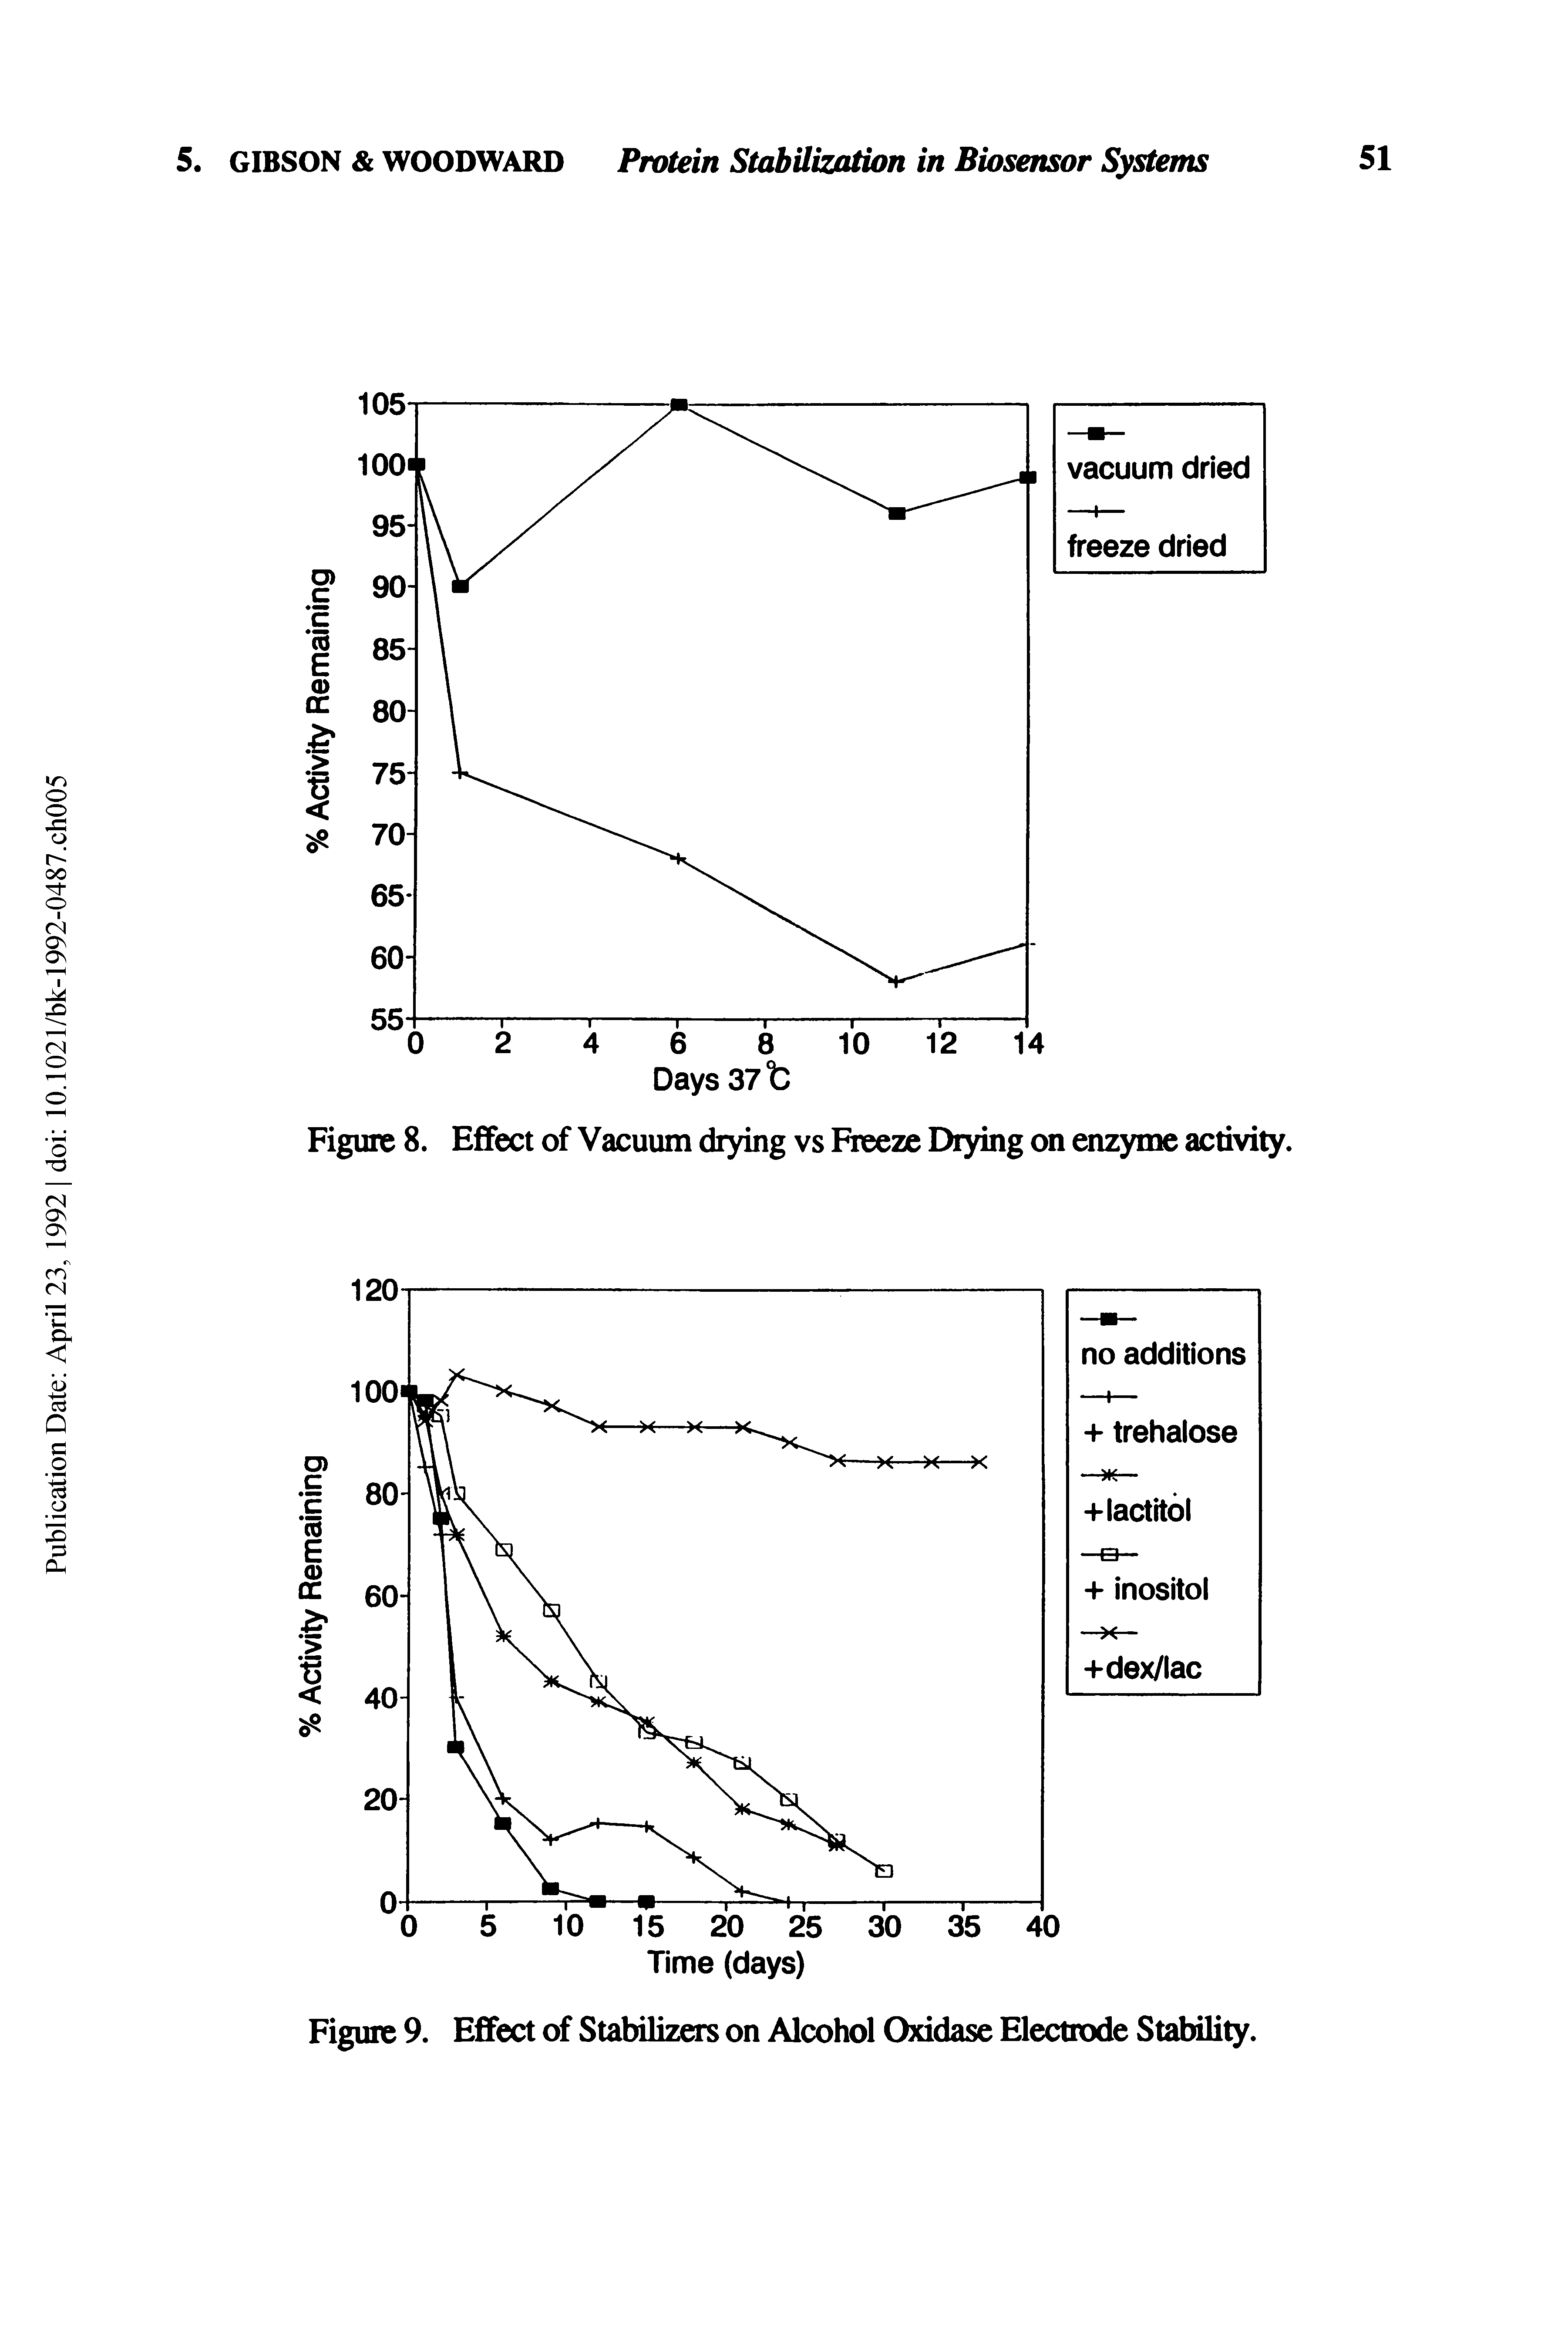 Figure 8. Effect of Vacuum drying vs Freeze Drying on enzyme activity.